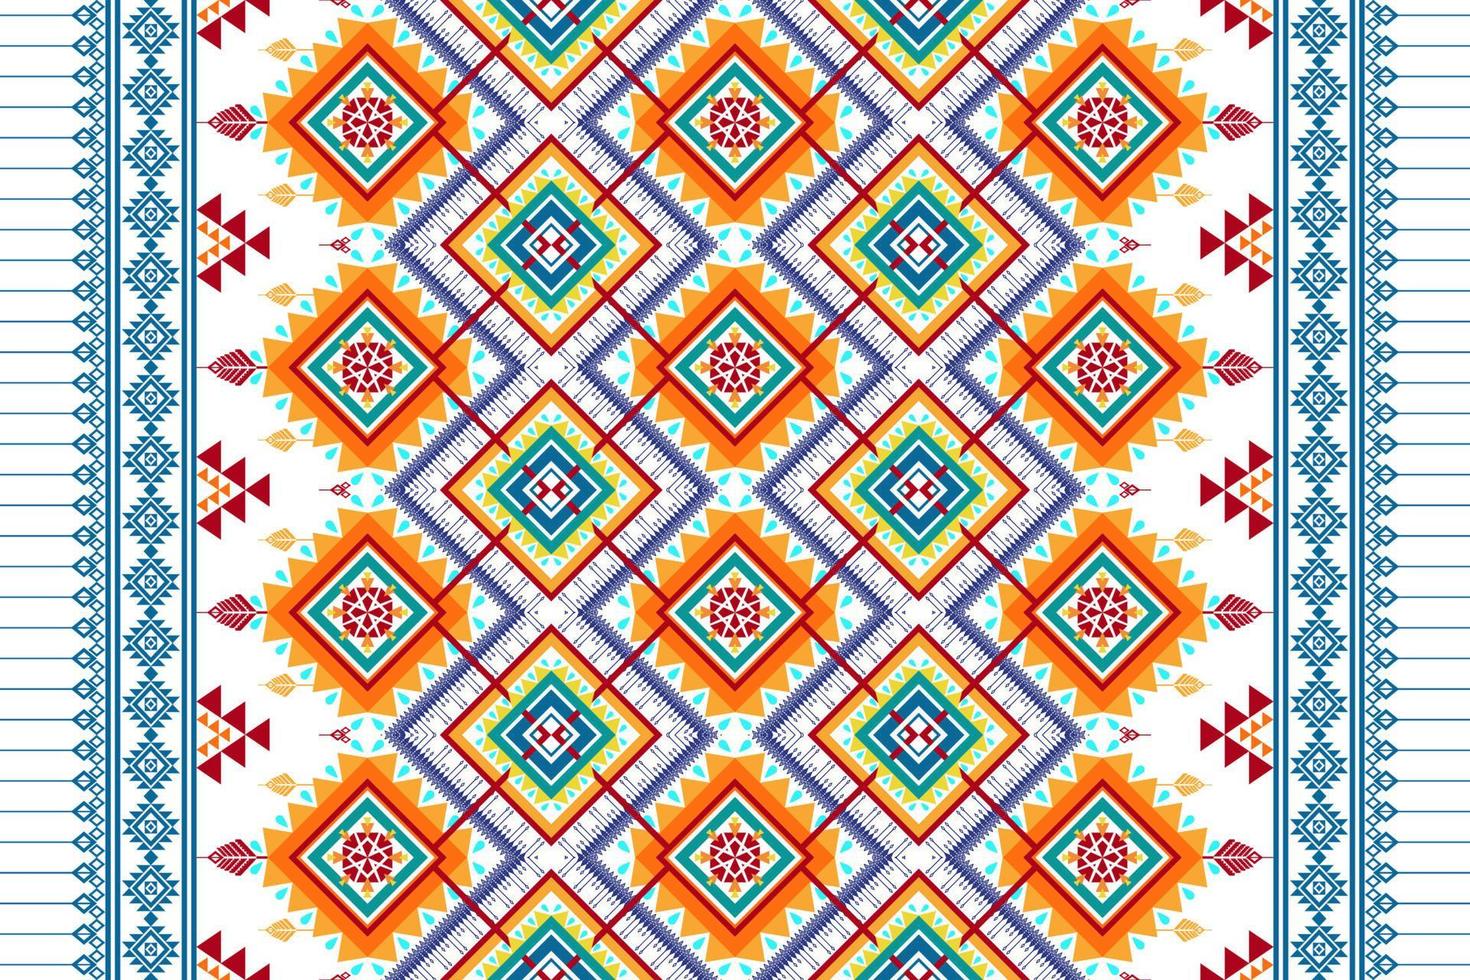 Geometric abstract ethnic seamless pattern design. Aztec fabric carpet mandala ornament chevron textile decoration wallpaper. Tribal turkey African Indian traditional embroidery vector